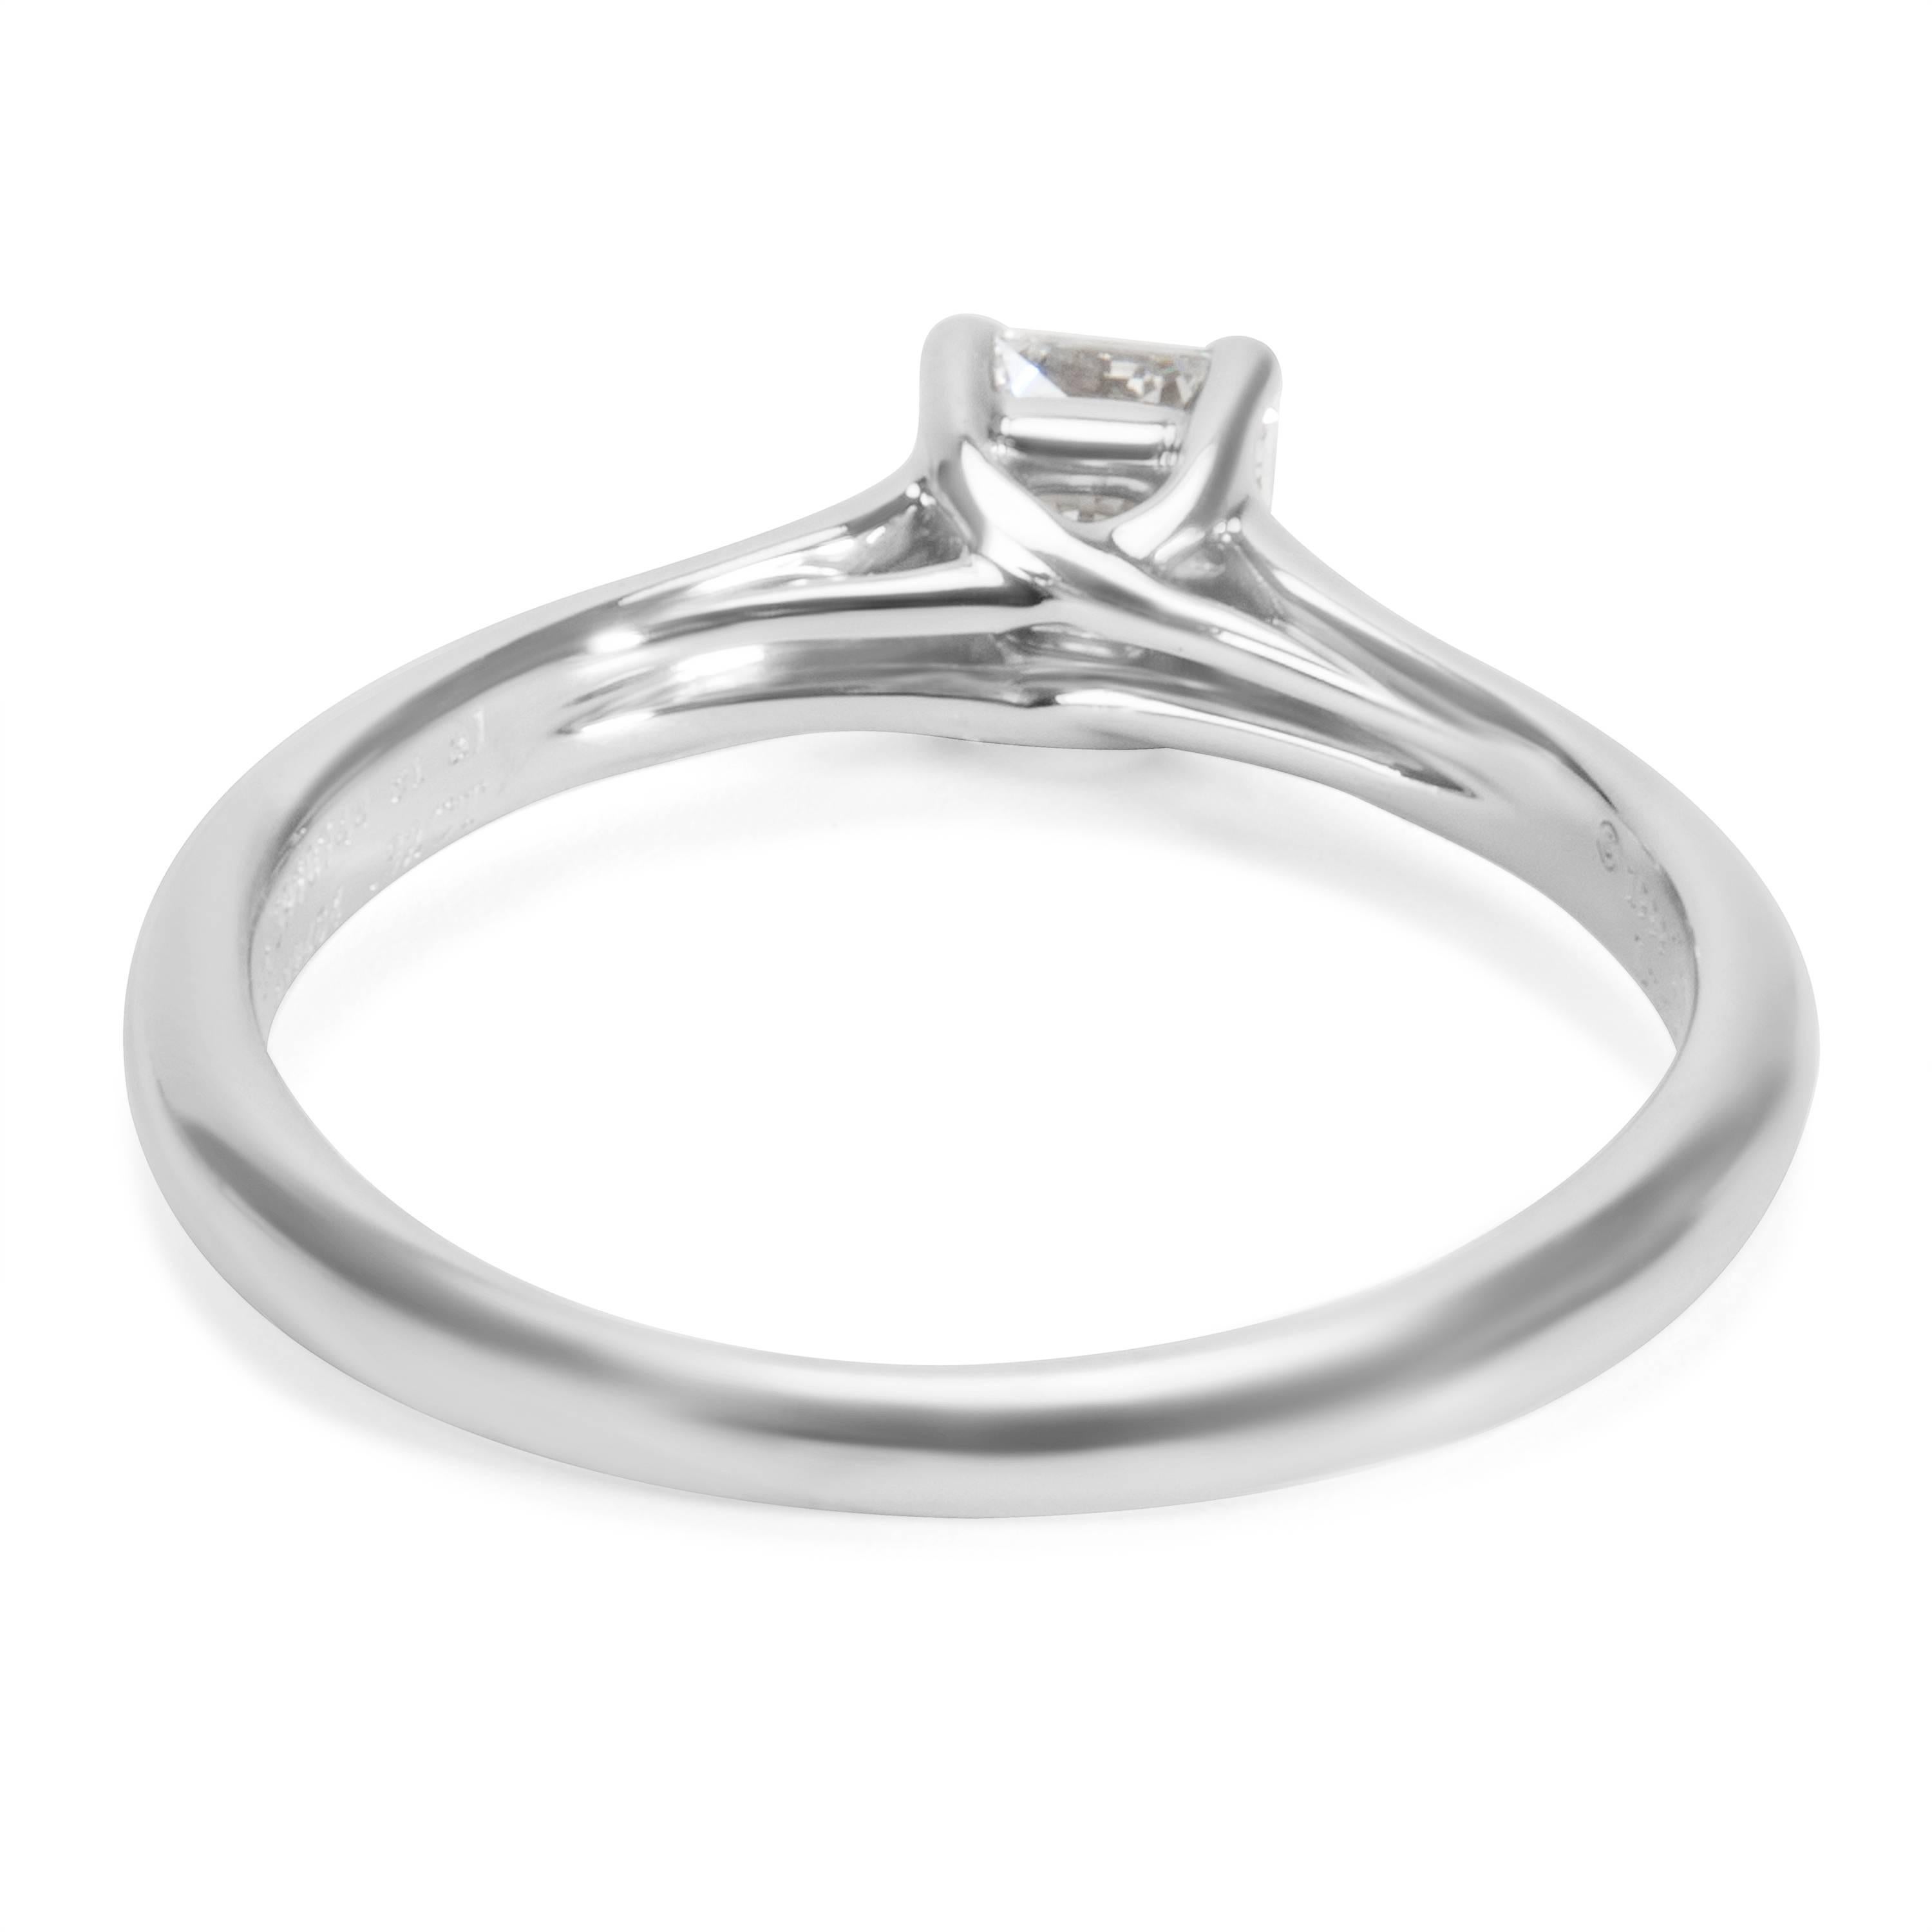 Modern Tiffany & Co. Diamond Solitaire Engagement Ring in Platinum (0.32 CTW)